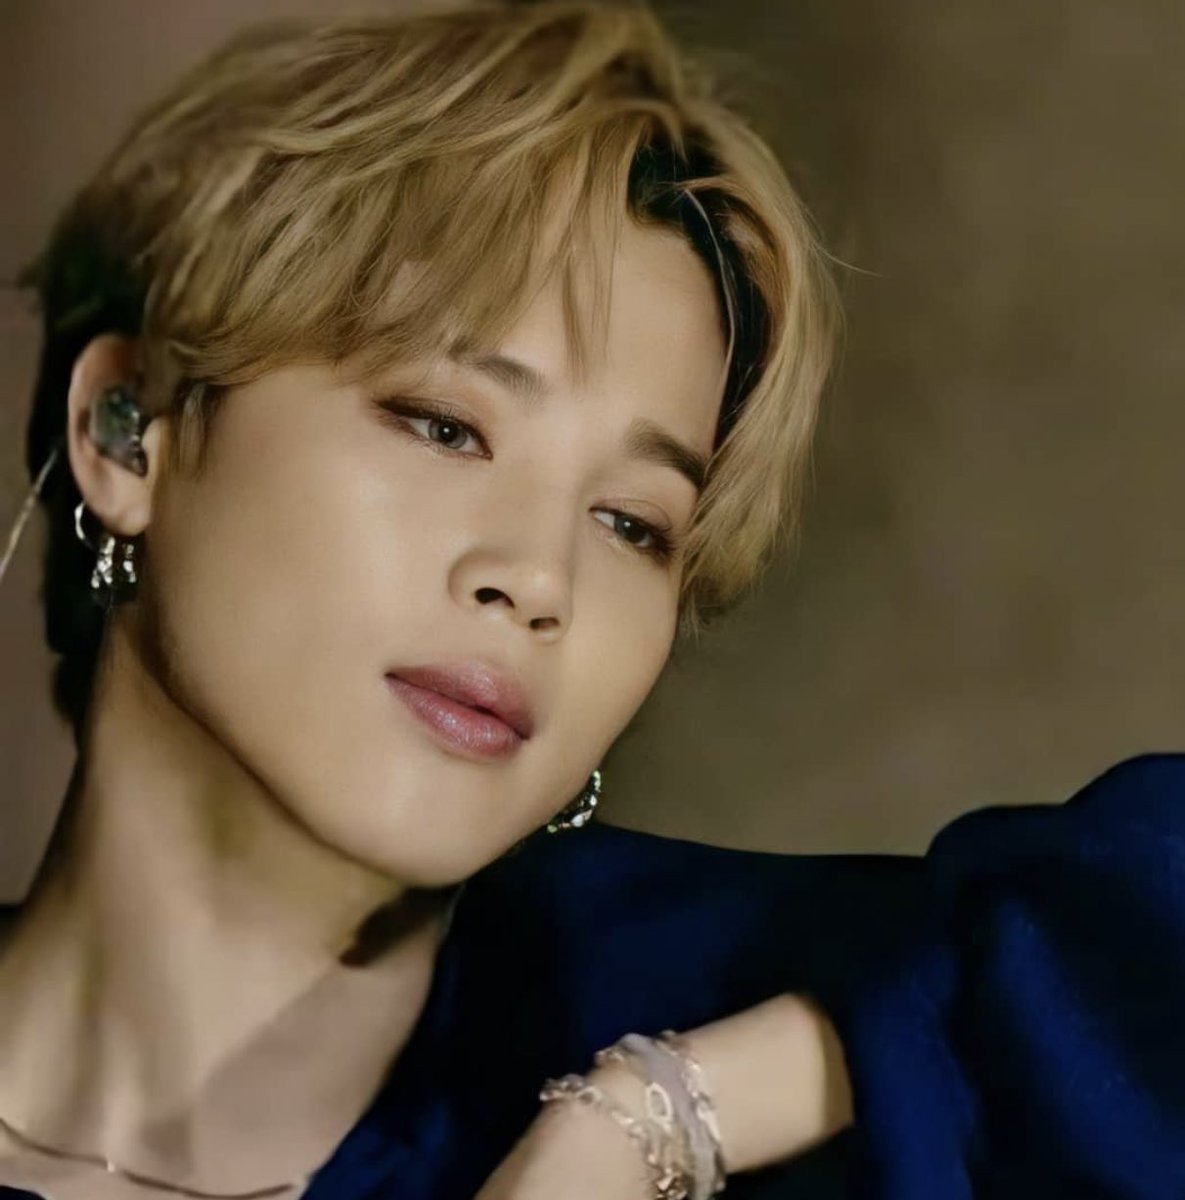 So,where do I begin?When I started with  @BTS_twt I was blown away by  #Jimin charisma and dancing and his beauty “out of these world”.I seriously could not see anyone else in the MVs & performances.I still stare at him sometimes forgetting about the others  #StageGeniusJimin